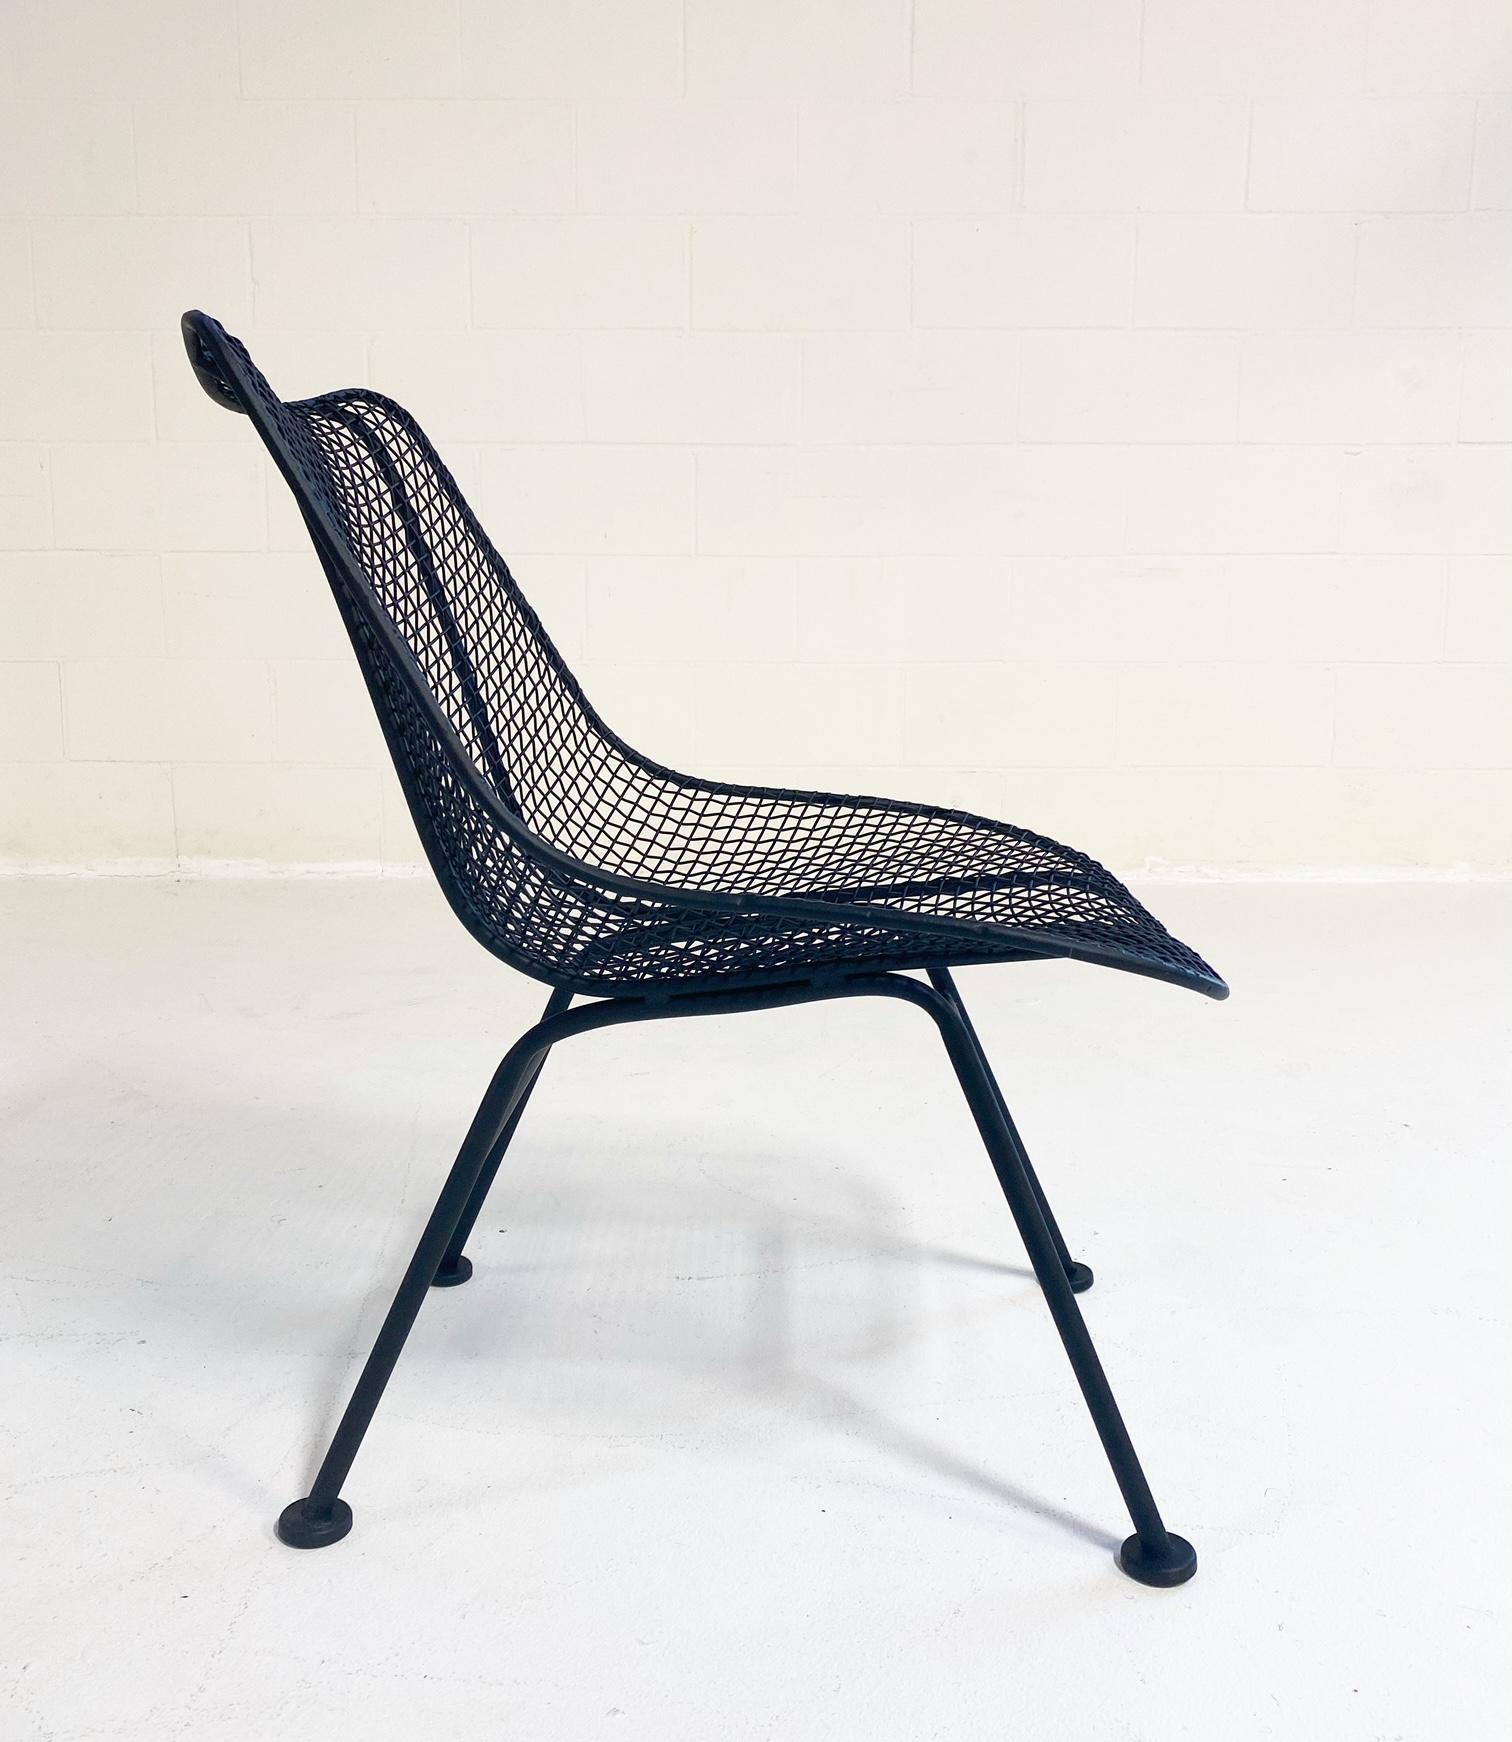 From design within reach: Meshing durability with delicacy — An alfresco favorite since its debut, the handcrafted Sculptura chairs transform sturdy iron mesh into an airy silhouette that comfortably cradles the